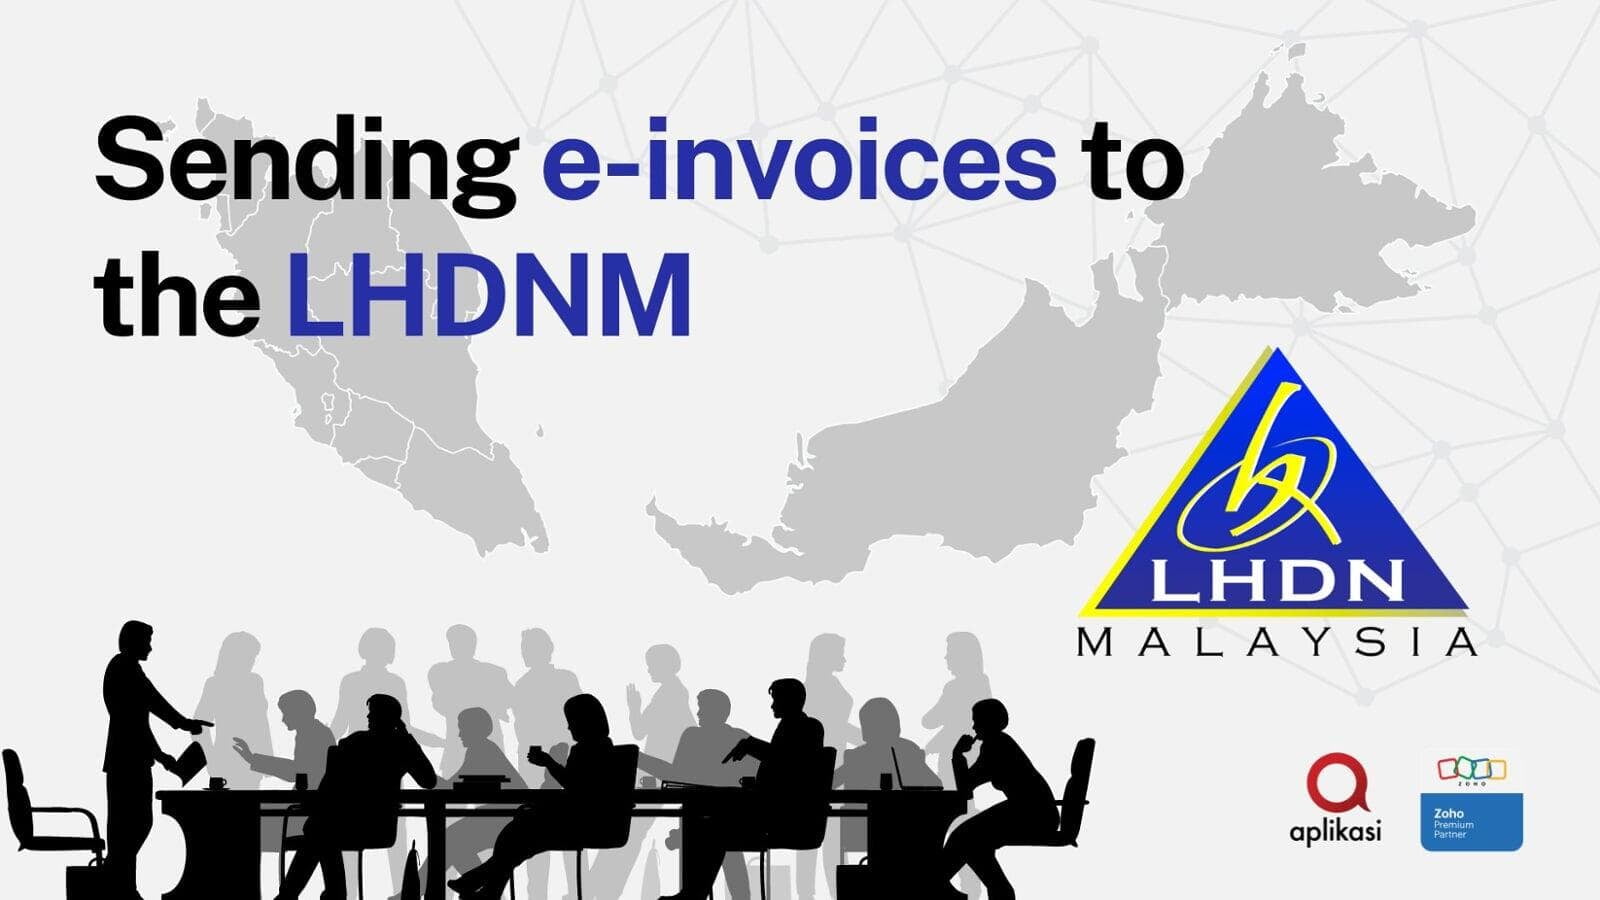 Sending e-invoices to the LHDNM